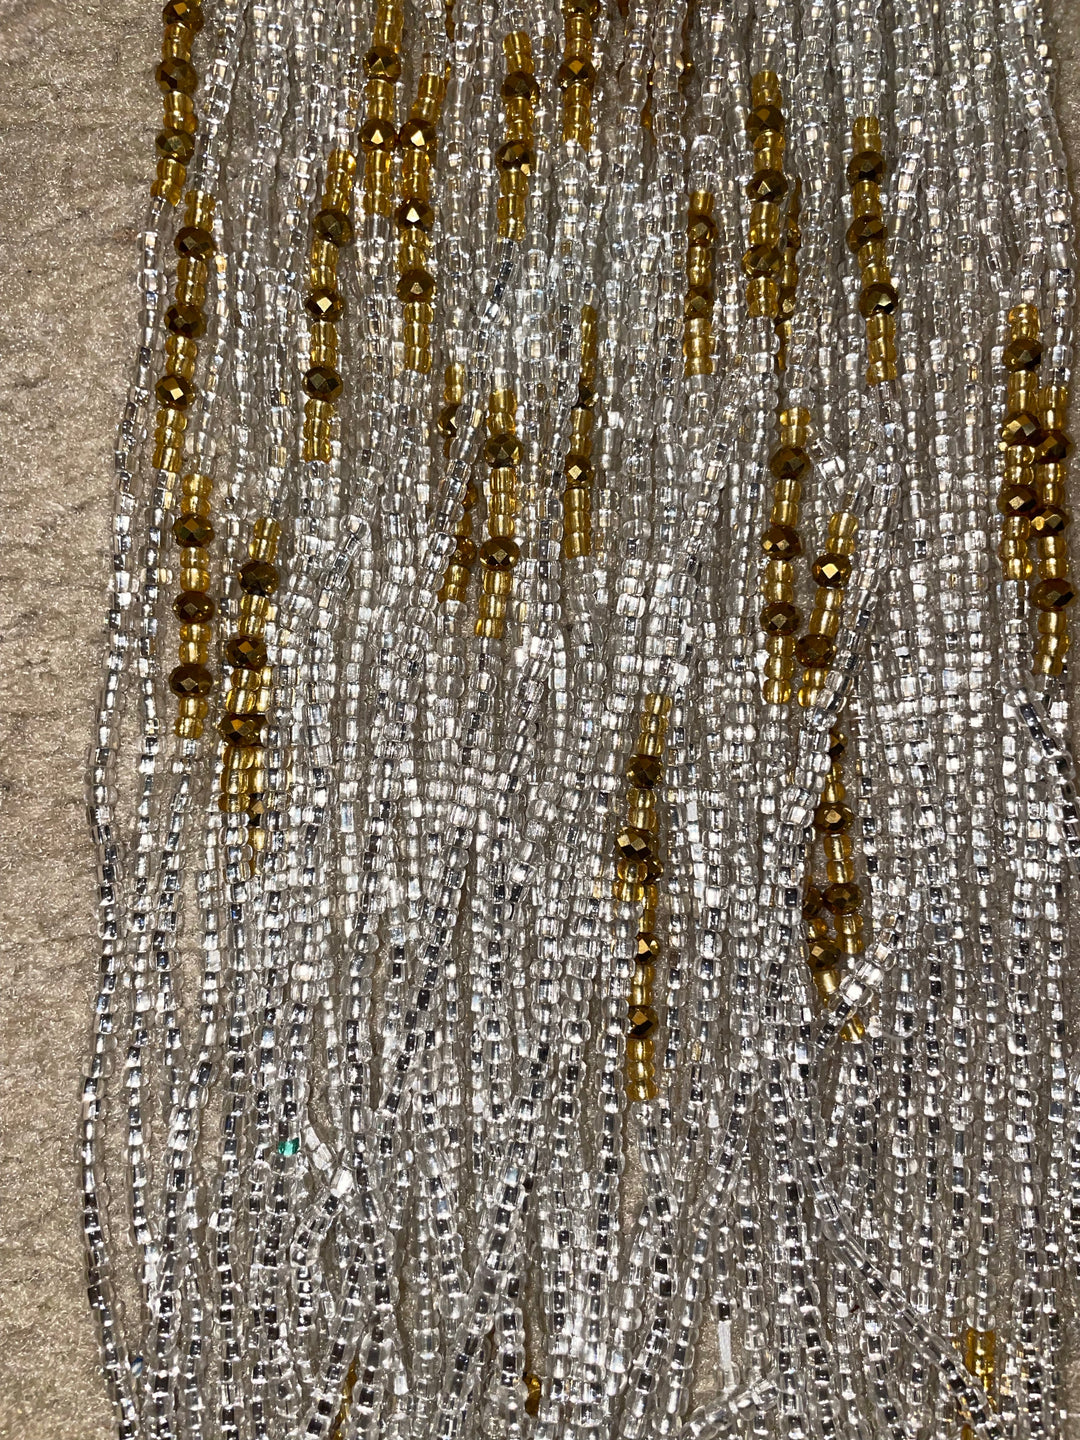 Goddess👸🏾 Silver and Gold waist beads 🔥 plus size waist beads. Fit up –  K.D.Kollections Store